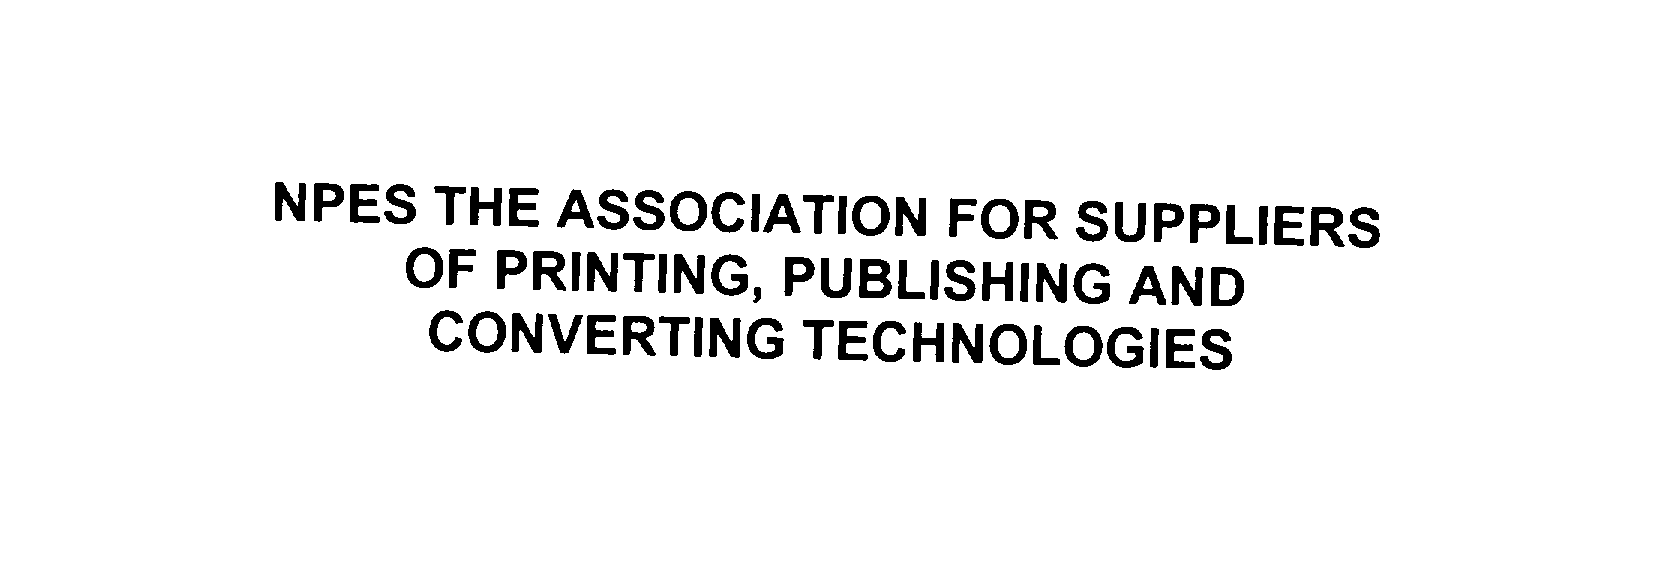  NPES THE ASSOCIATION FOR SUPPLIERS OF PRINTING, PUBLISHING AND CONVERTING TECHNOLOGIES